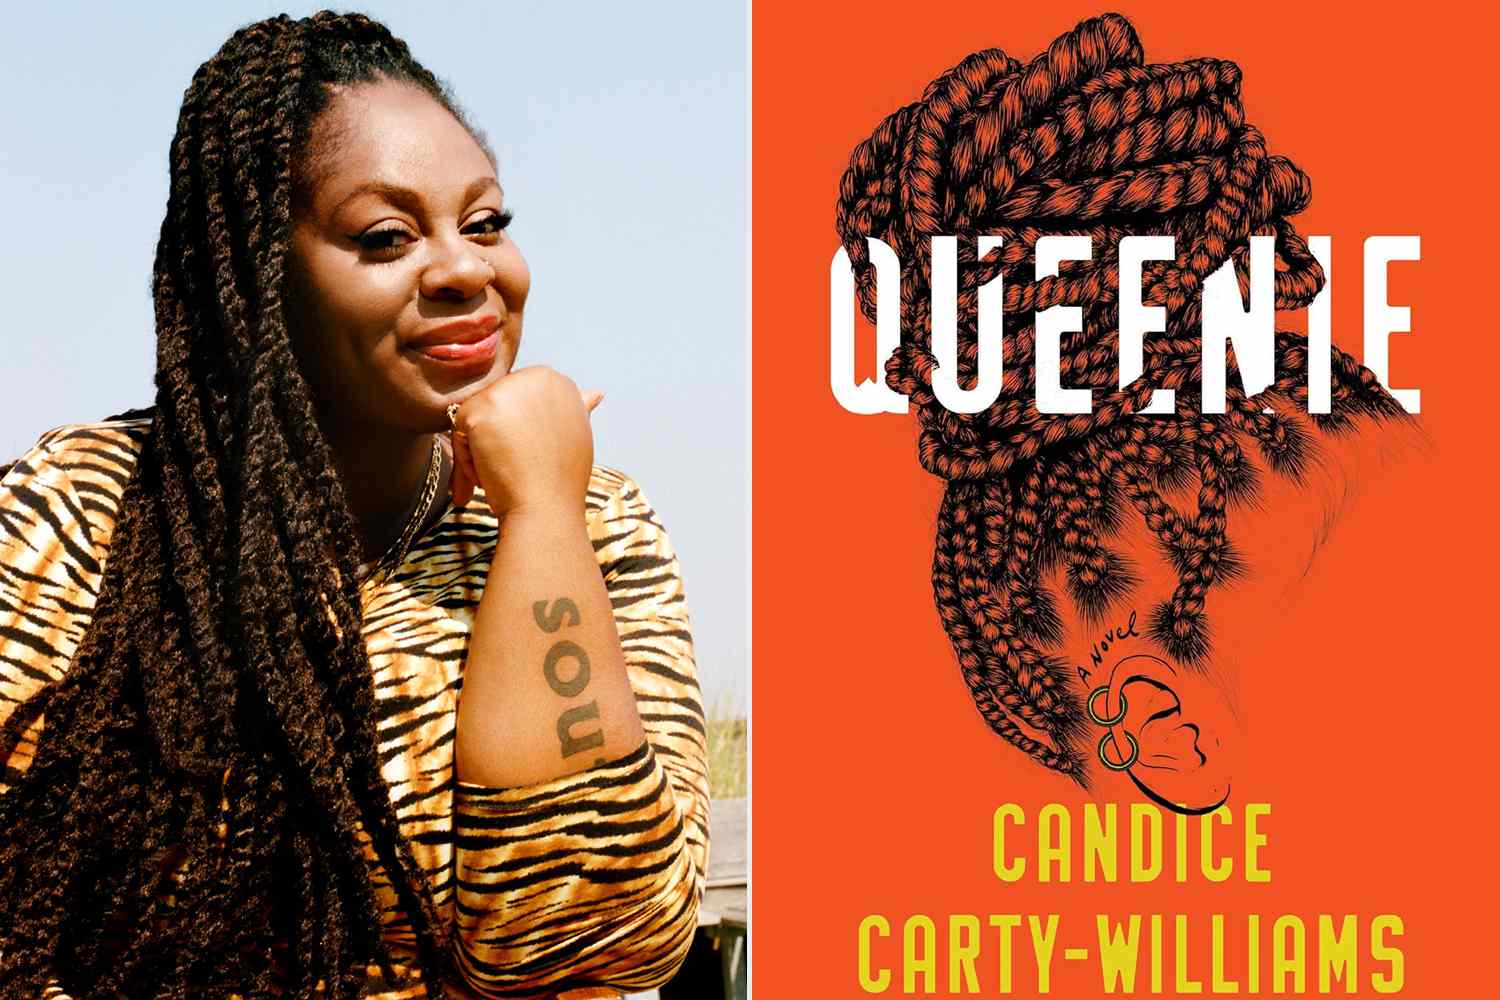 “Queenie” Author Candice Carty-Williams Says She’s ‘Yet to See a Character’ Like Hers: ‘It Should Be Commonplace’ (Exclusive)